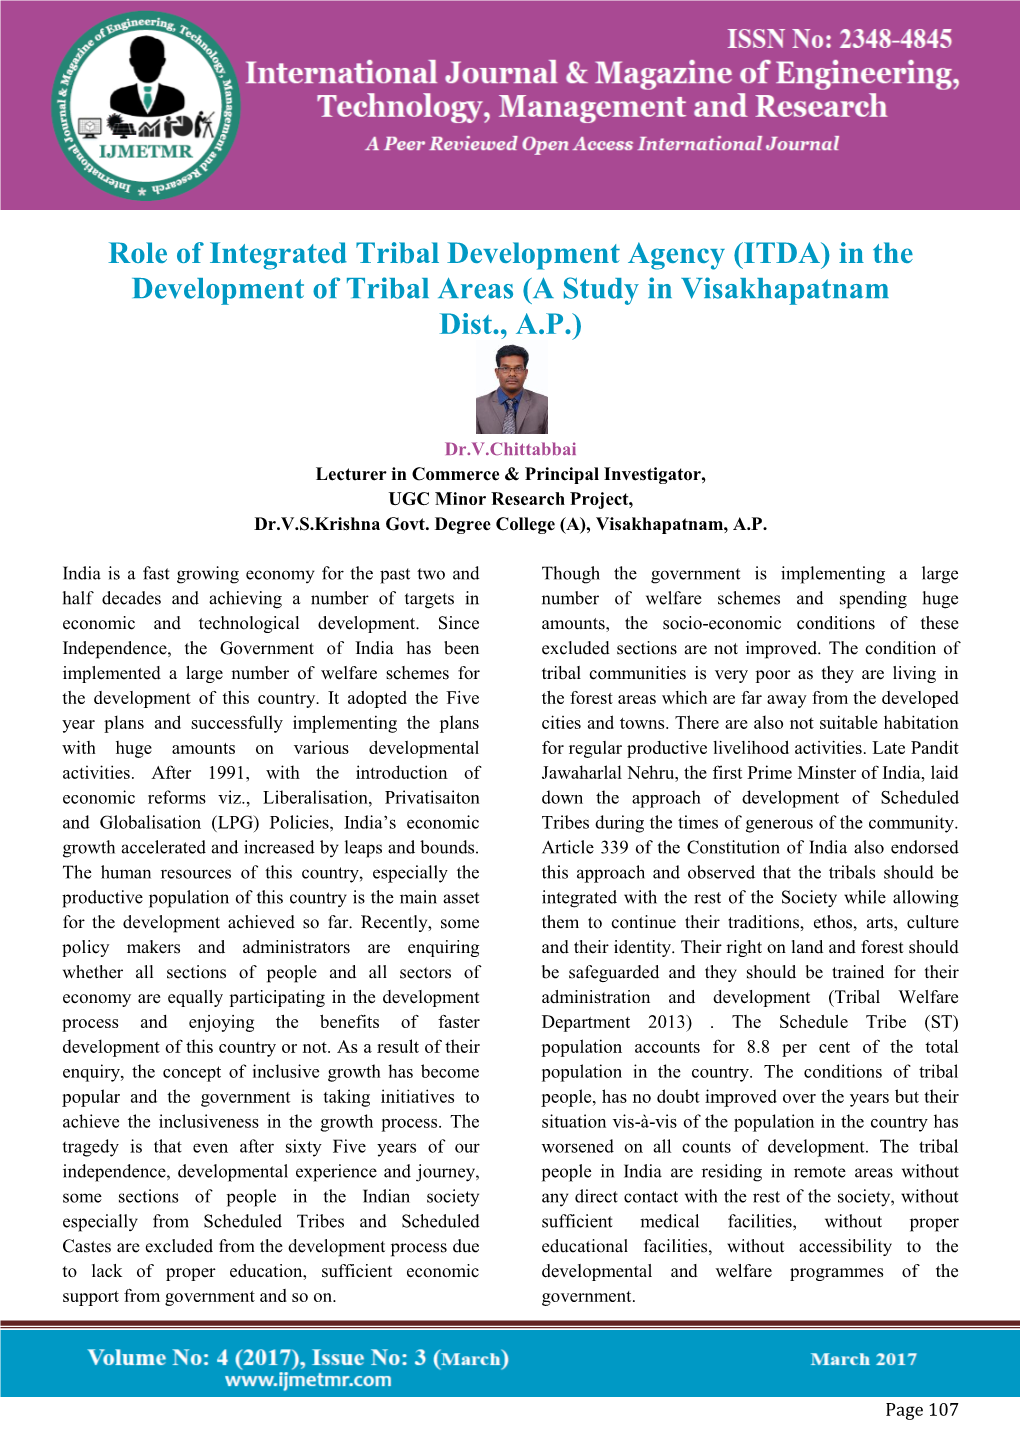 Role of Integrated Tribal Development Agency (ITDA) in the Development of Tribal Areas (A Study in Visakhapatnam Dist., A.P.)